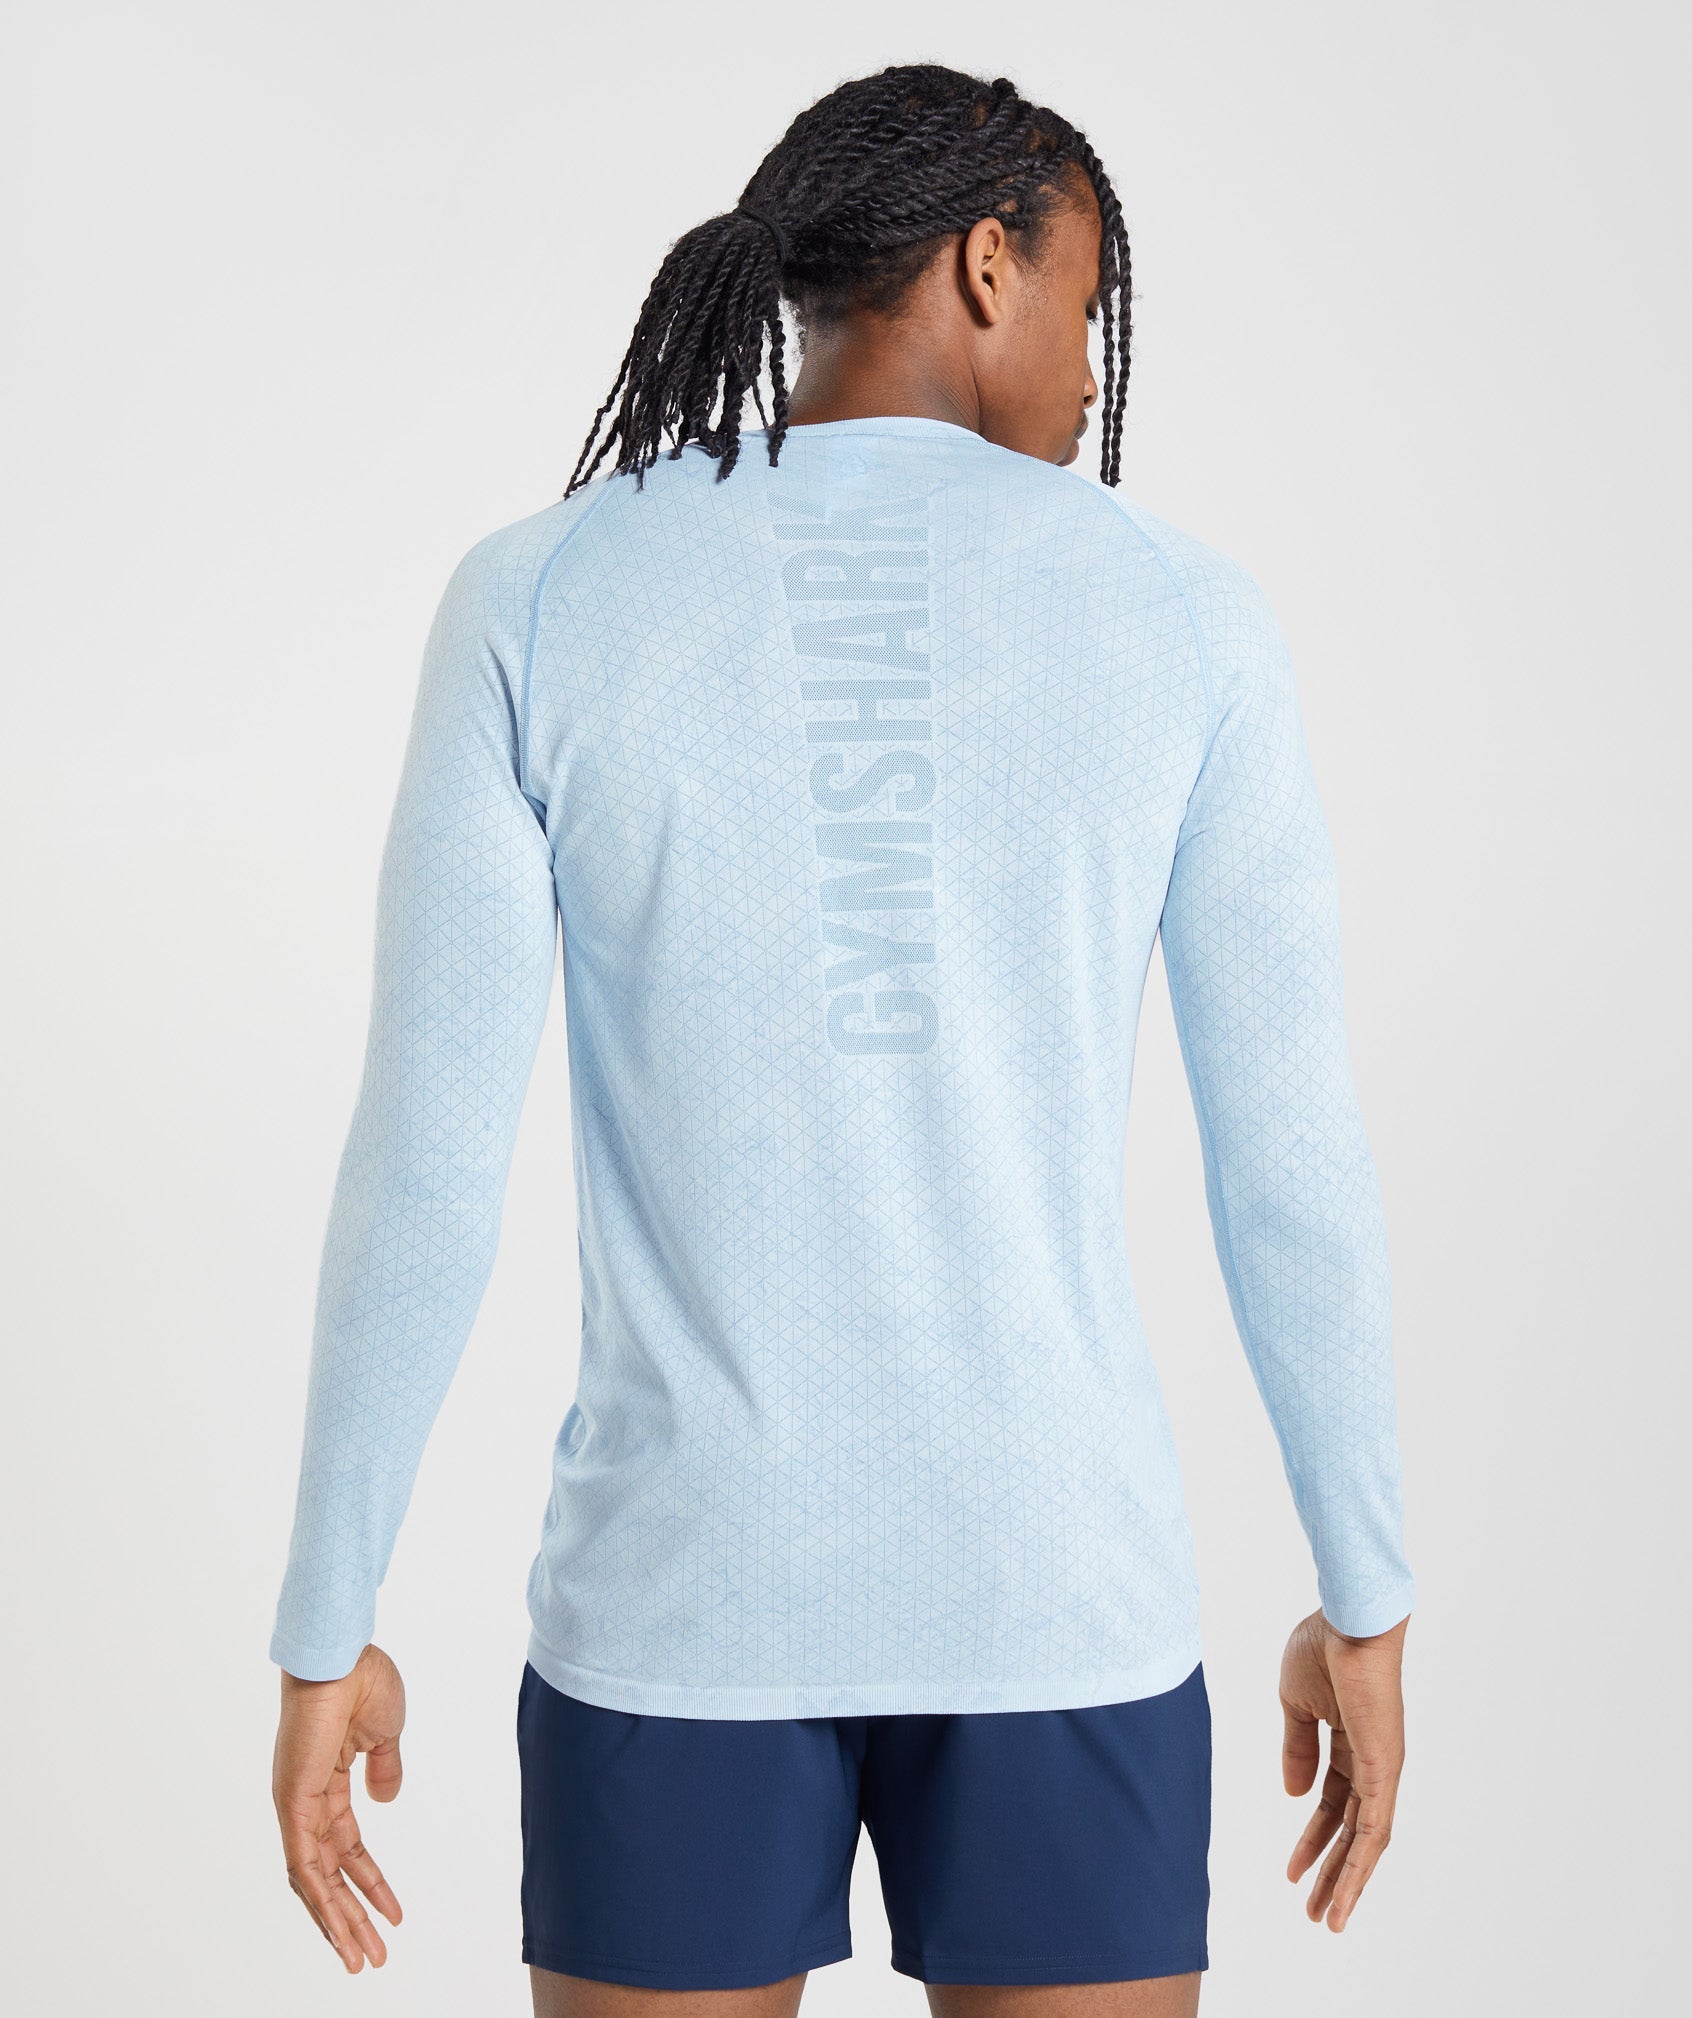 Geo Seamless Long Sleeve T-Shirt in White/Moonstone Blue - view 1